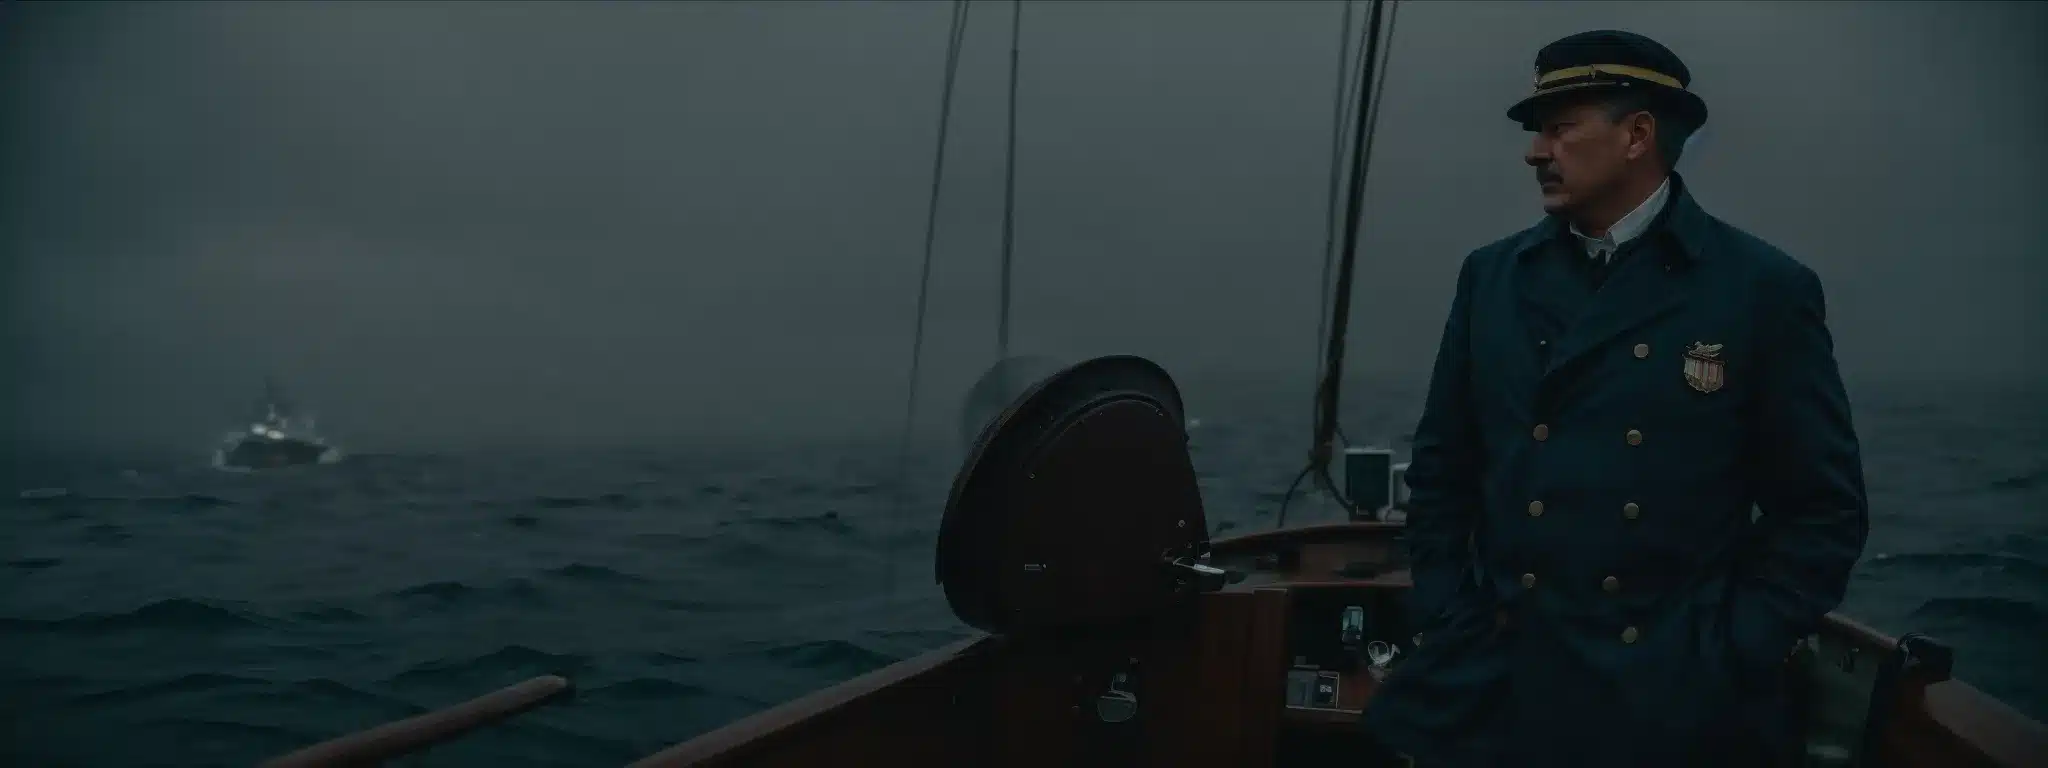 A Captain At The Helm Of A Ship, Navigating Through Fog And Choppy Waters.